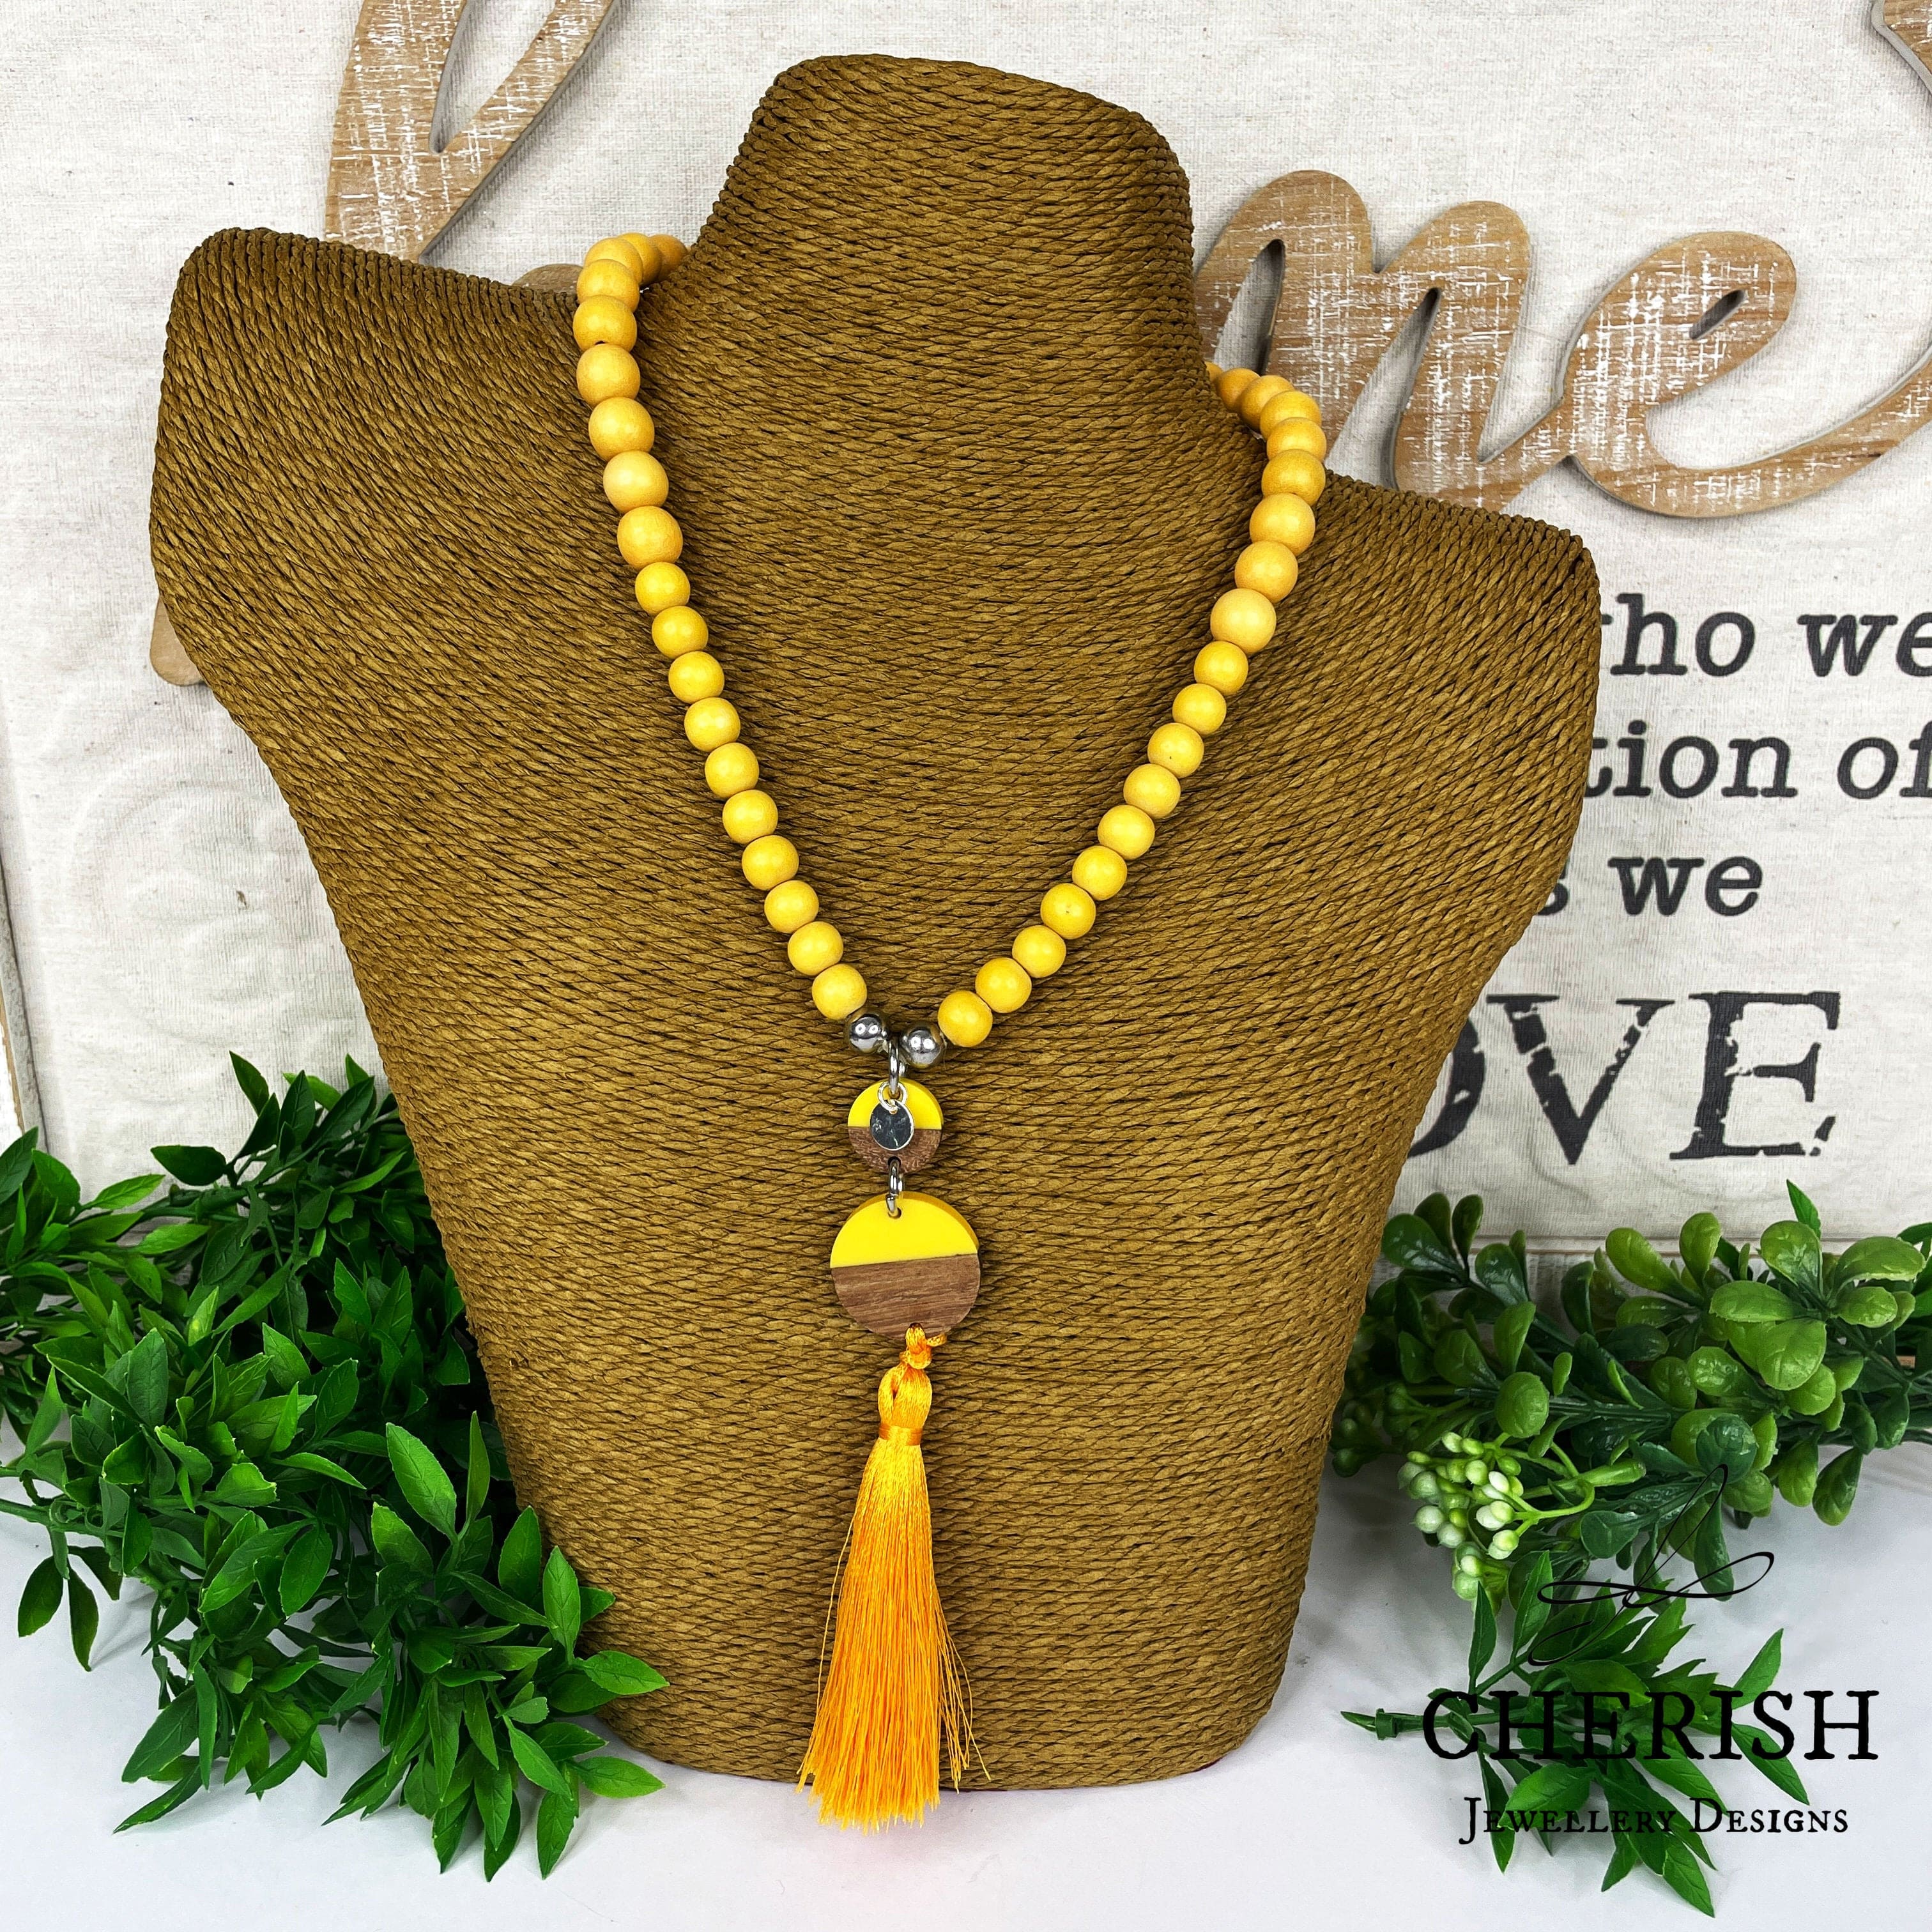 Aubree Timber Necklace in Yellow